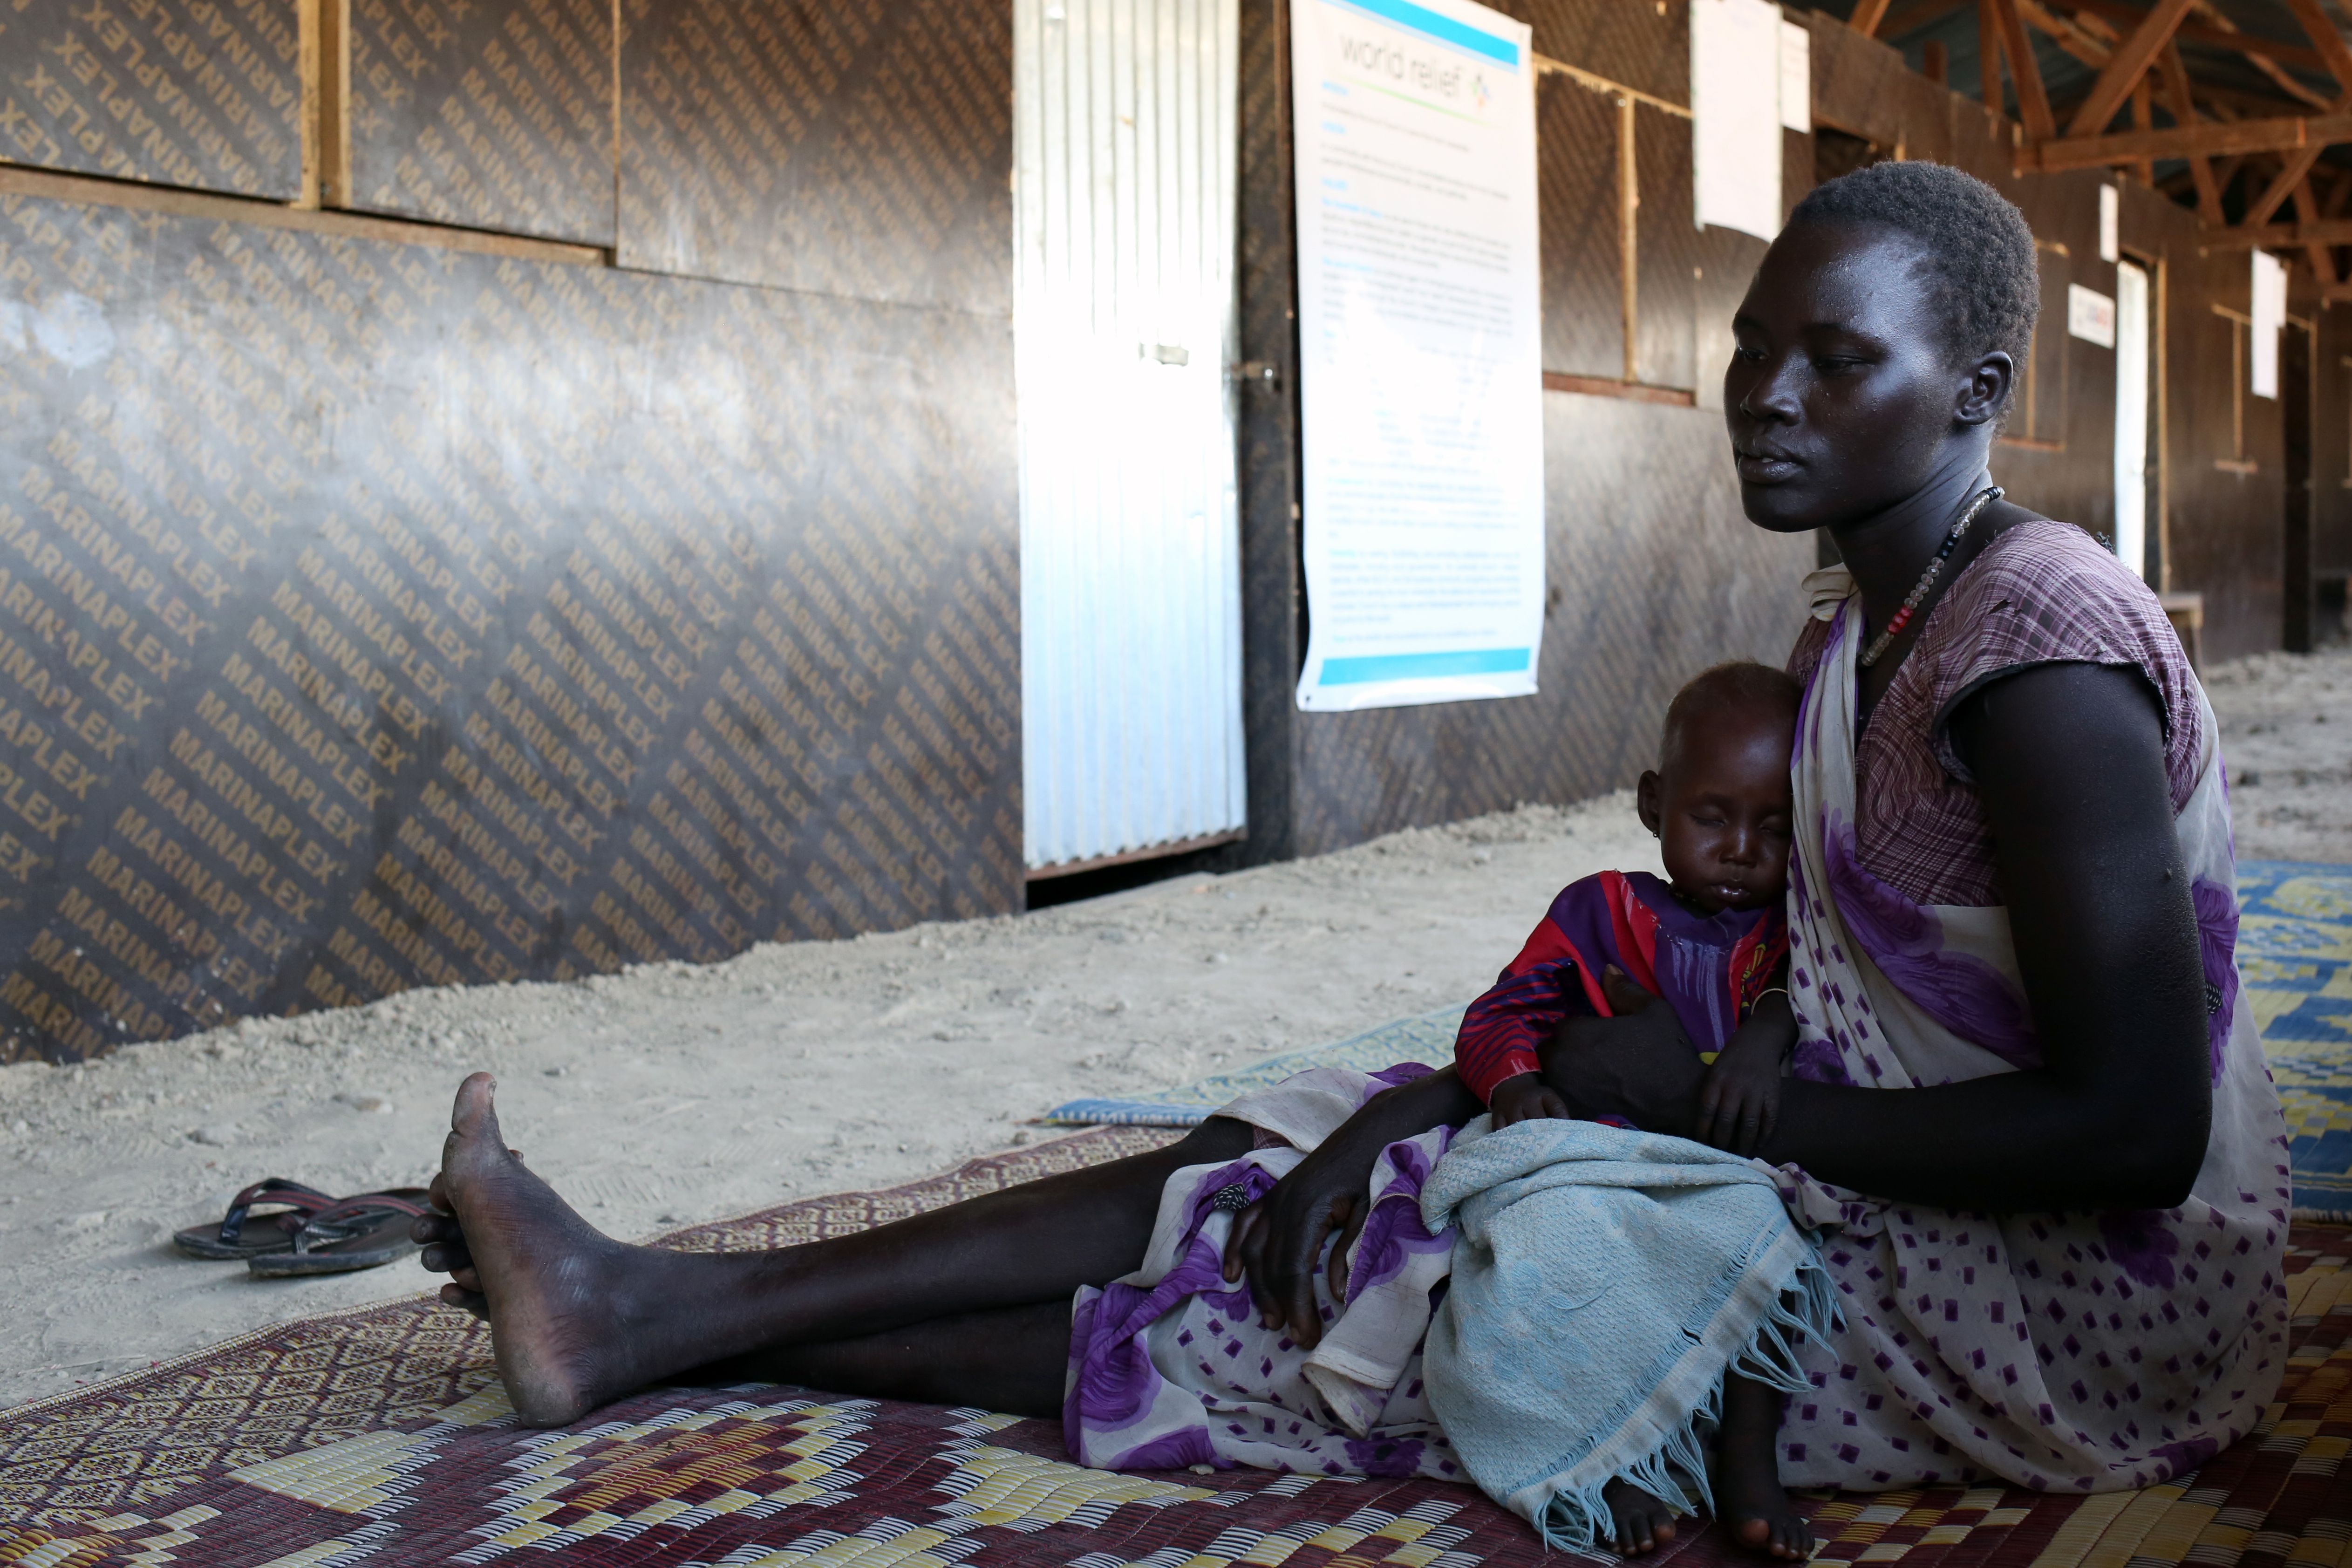 Nyabany and her daughter wait at a clinic at the U.N. base in Bentiu, South Sudan, on Dec. 18, 2016. Eight-month-old Nyadholi is suffering from severe acute malnutrition. Image by Cassandra Vinograd. South Sudan, 2016.